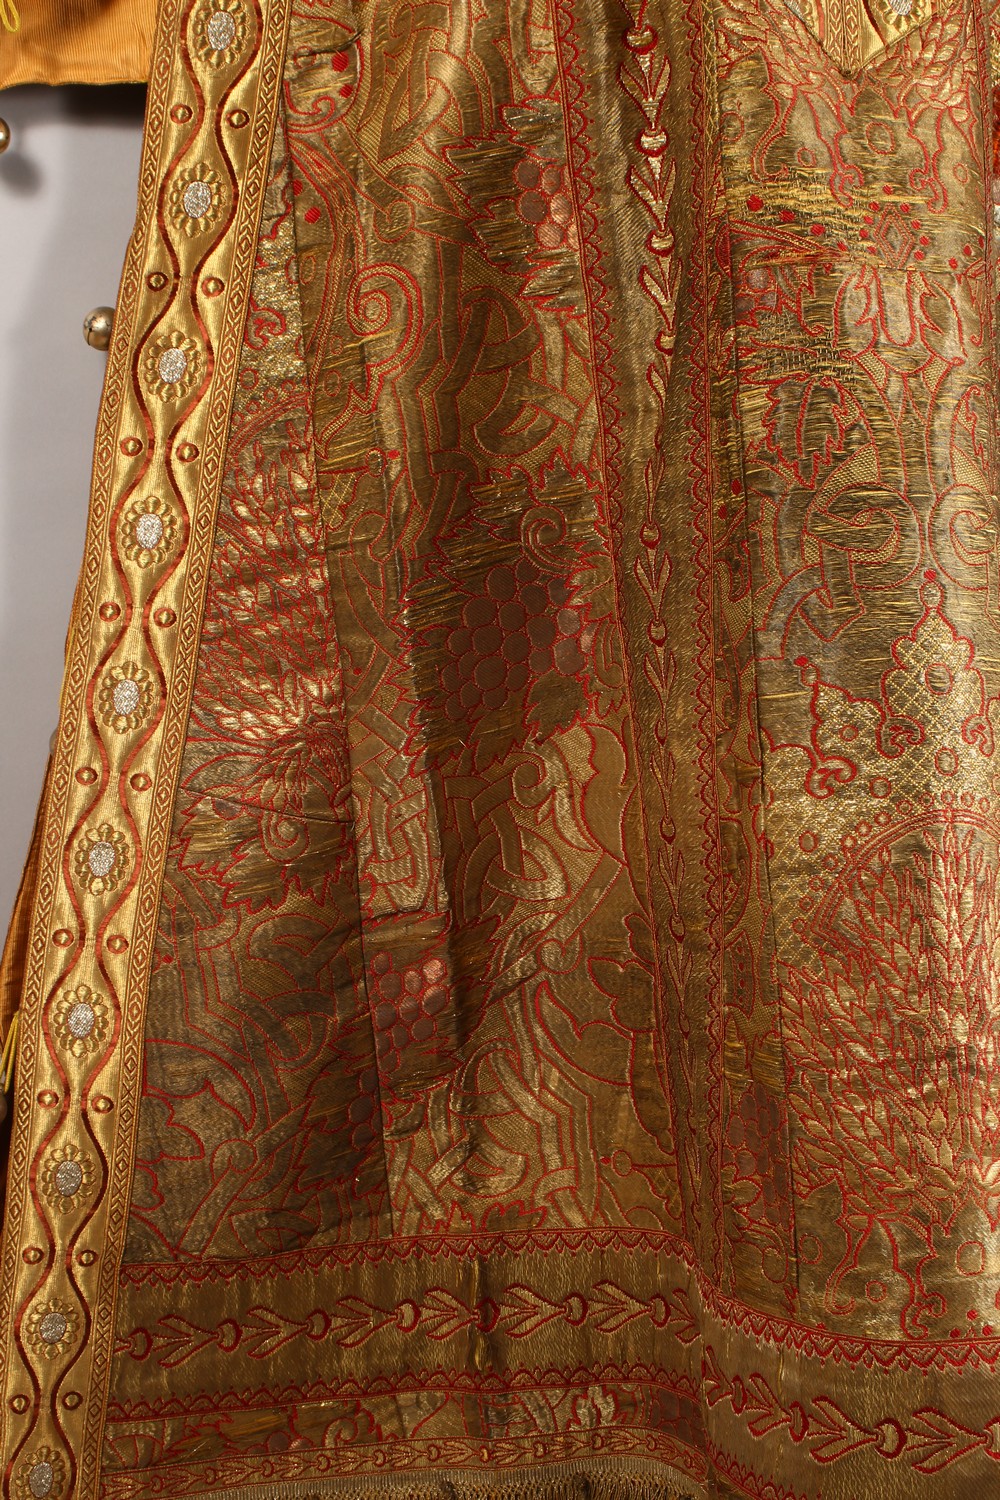 AN UNUSUAL EARLY 20TH CENTURY RUSSIAN COAT, with highly ornate gold thread embroidered decoration, - Image 9 of 22